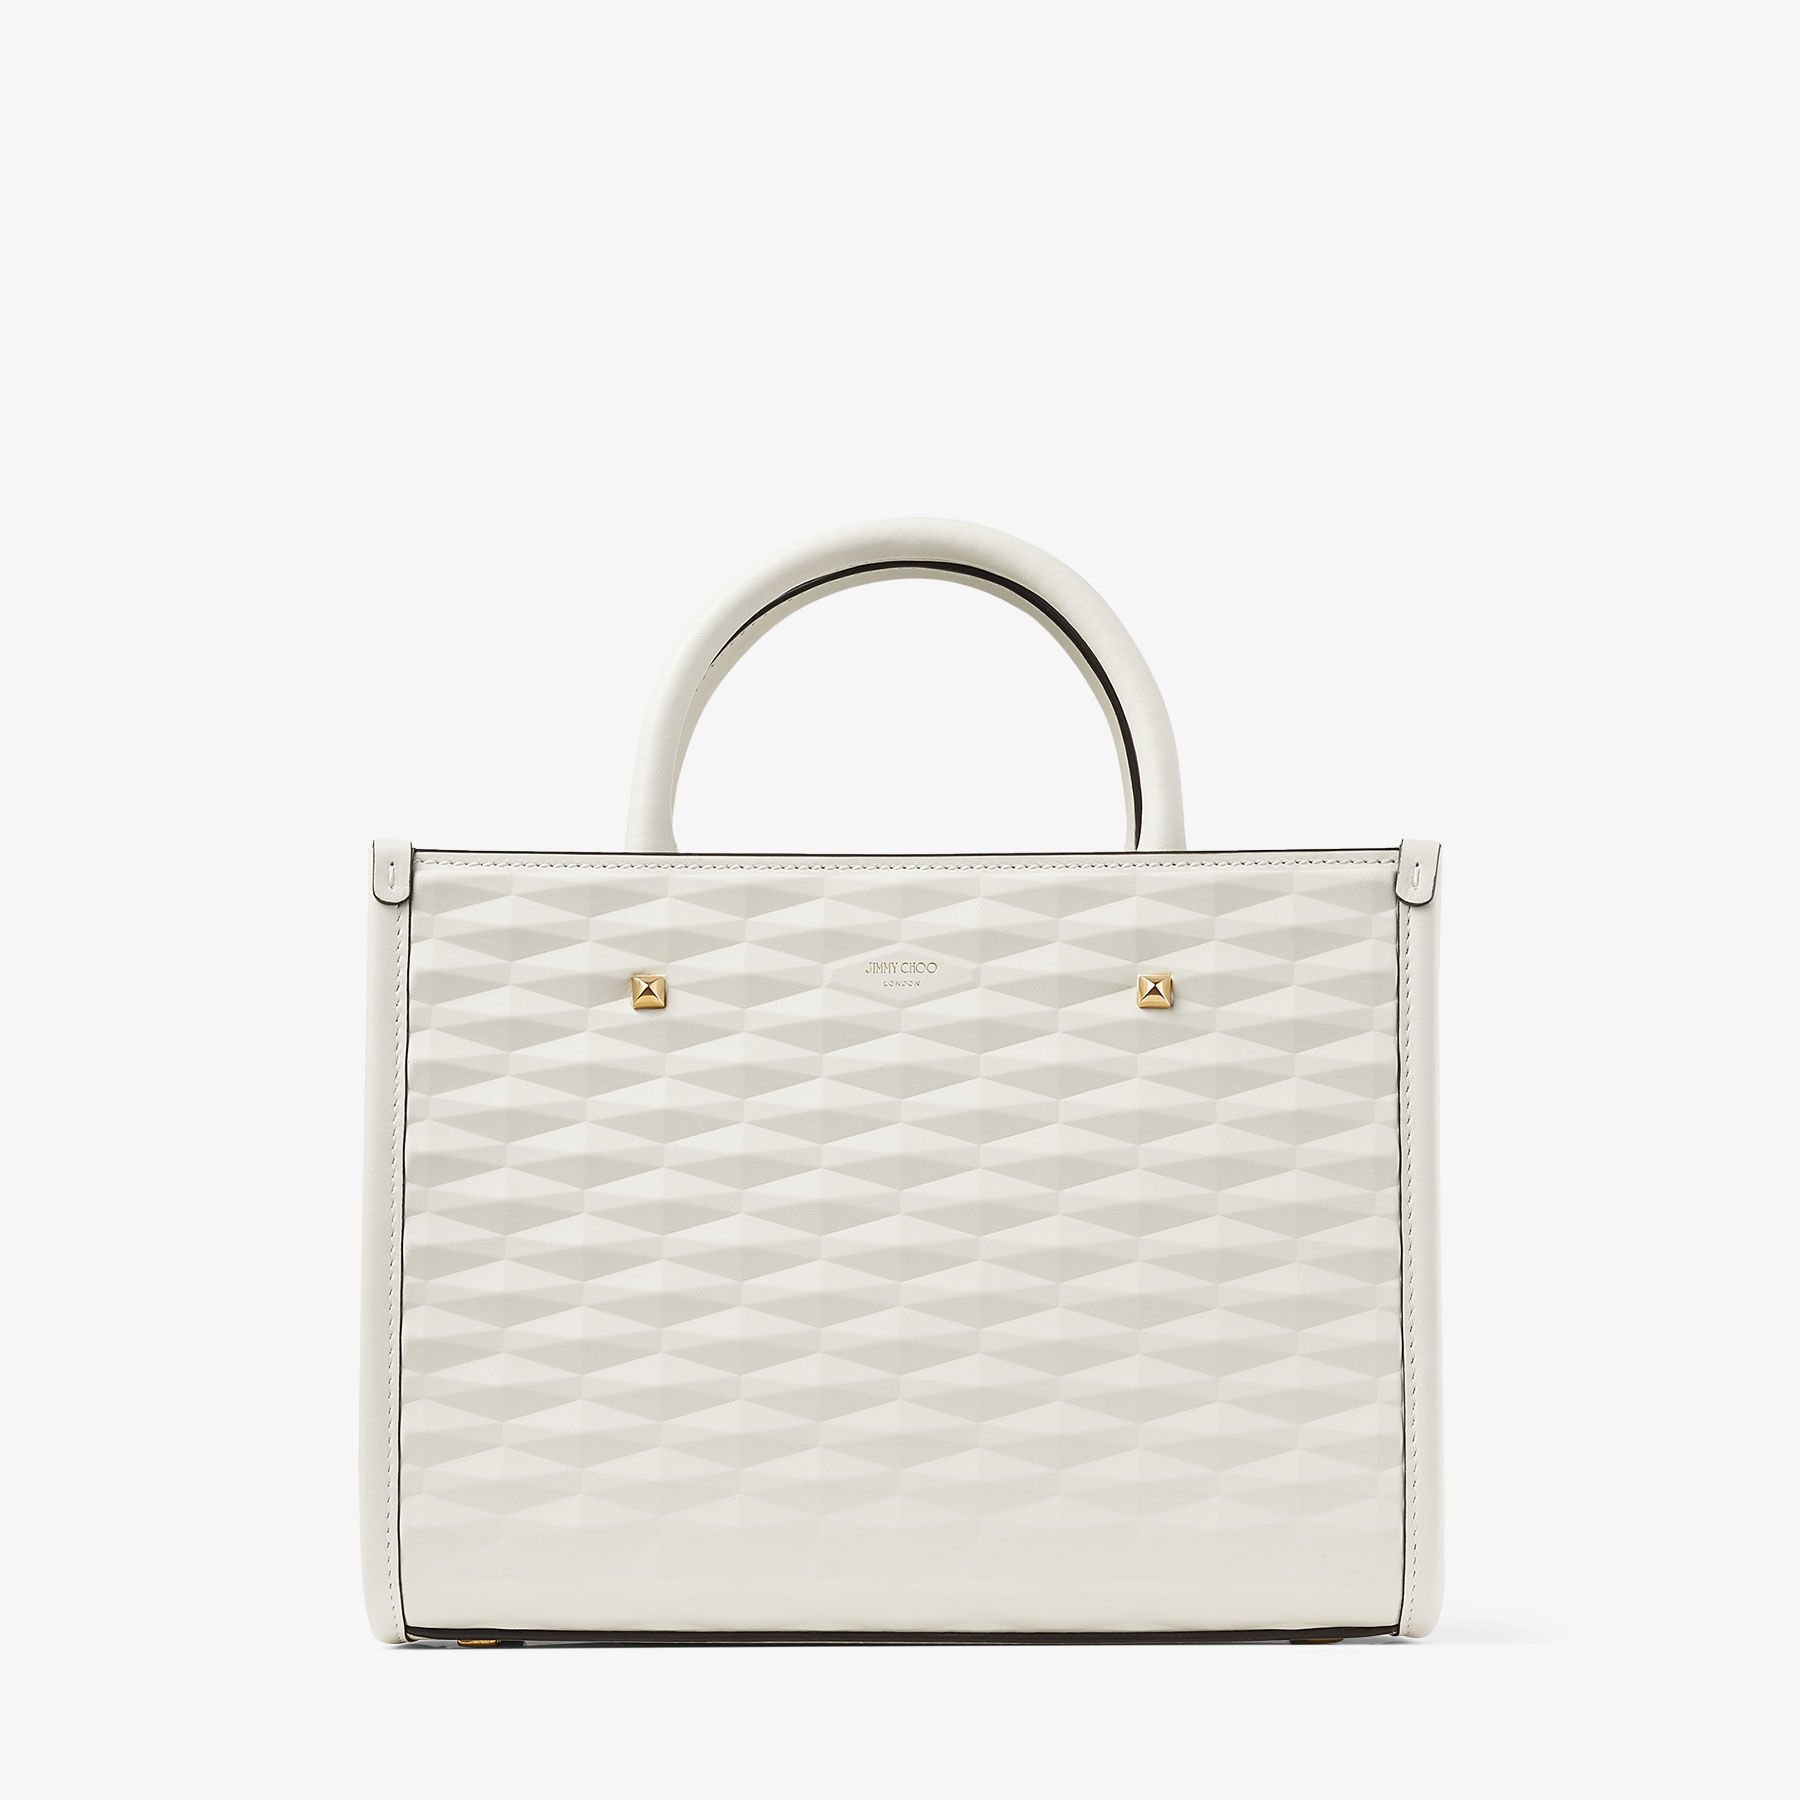 Avenue S Tote | White Diamond Embossed 3D Leather Tote Bag | JIMMY 